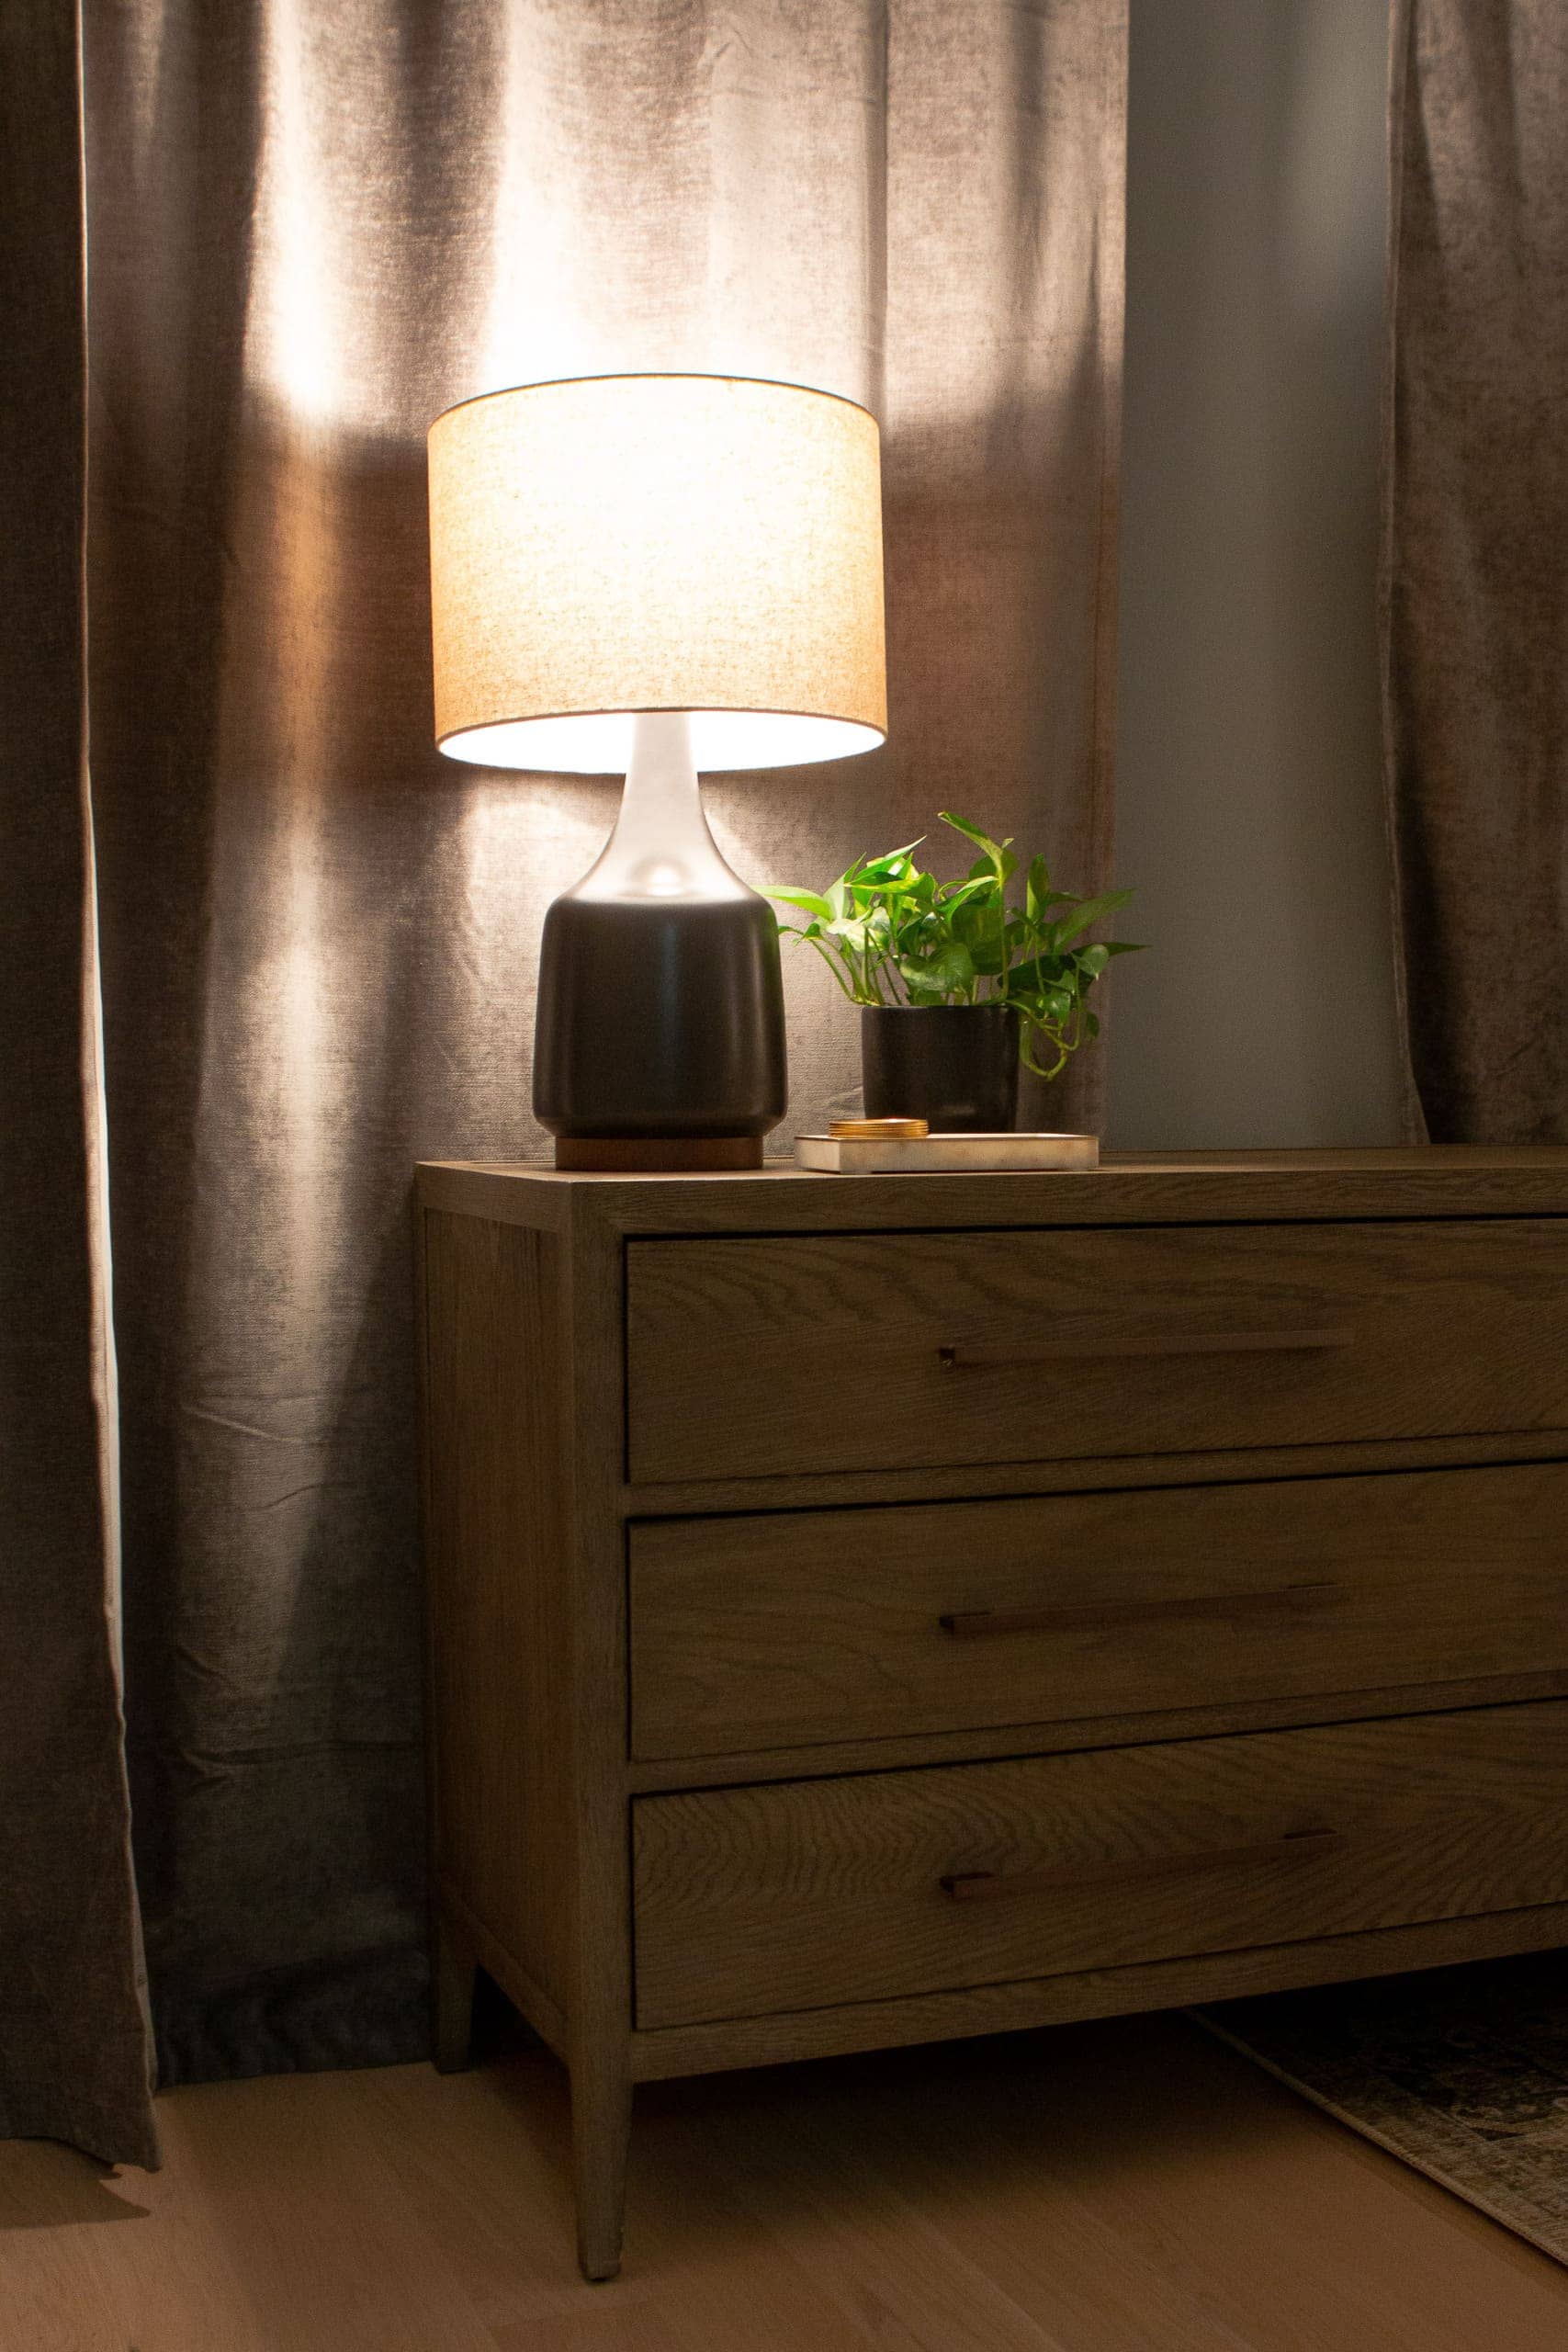 Tips to decorate a rental, invest in lighting